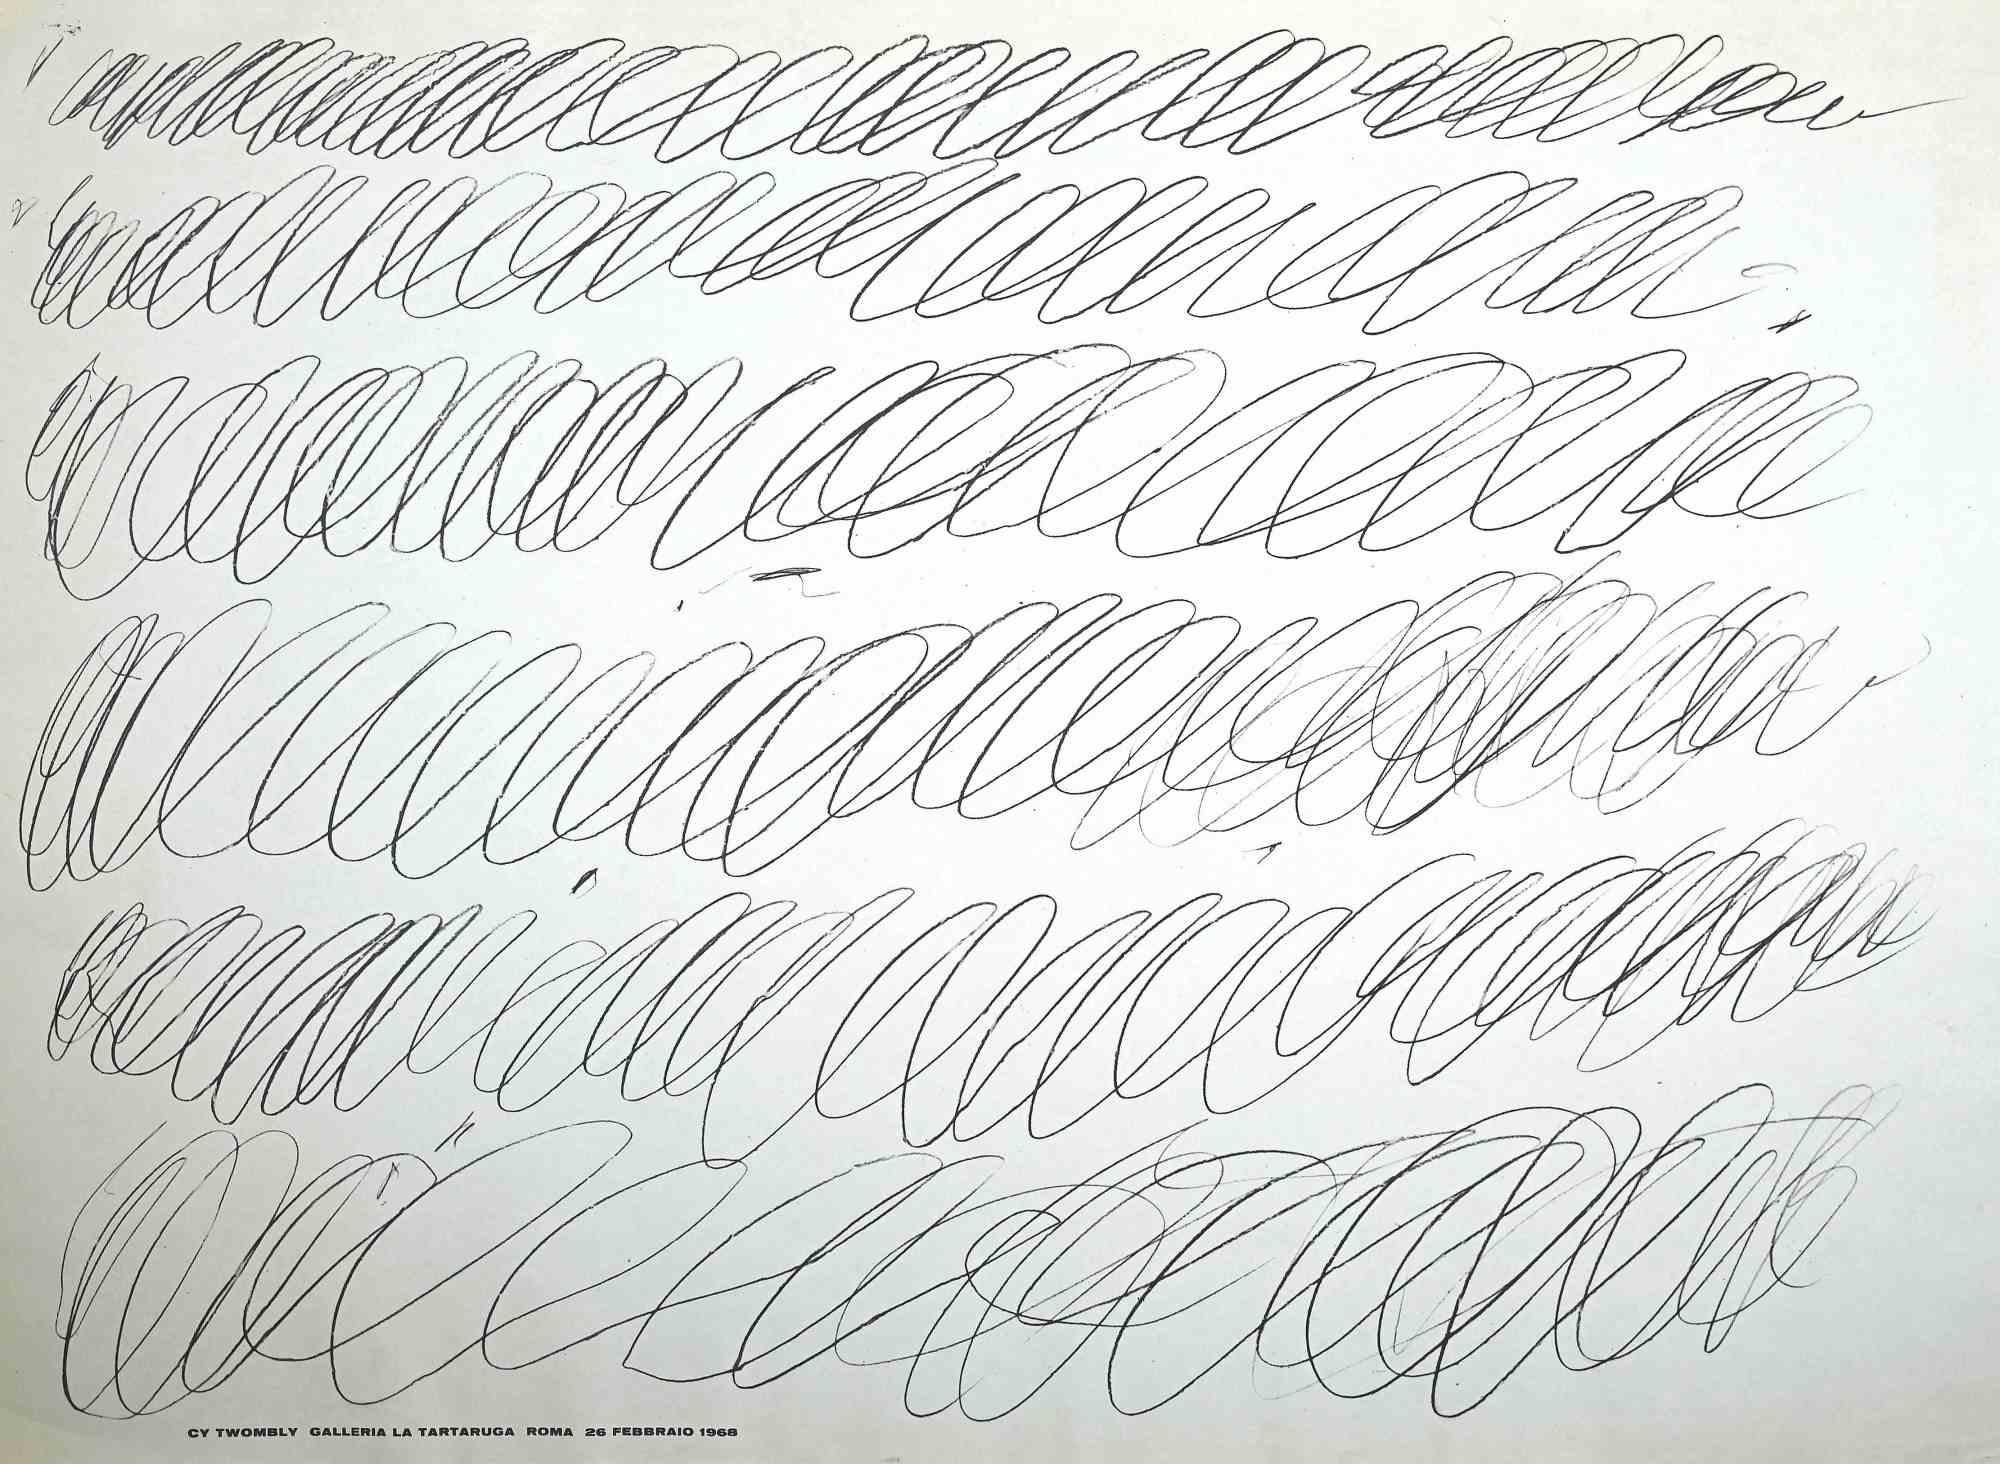 Cy Twombly Exhibition Galleria La Tartaruga 1968 is a very rare and precious exhibition offset and lithograph print on ivory colored paper.

The artwork was realized in the occasion of the first artist's exhibition in Italy at Galleria La Tartaruga